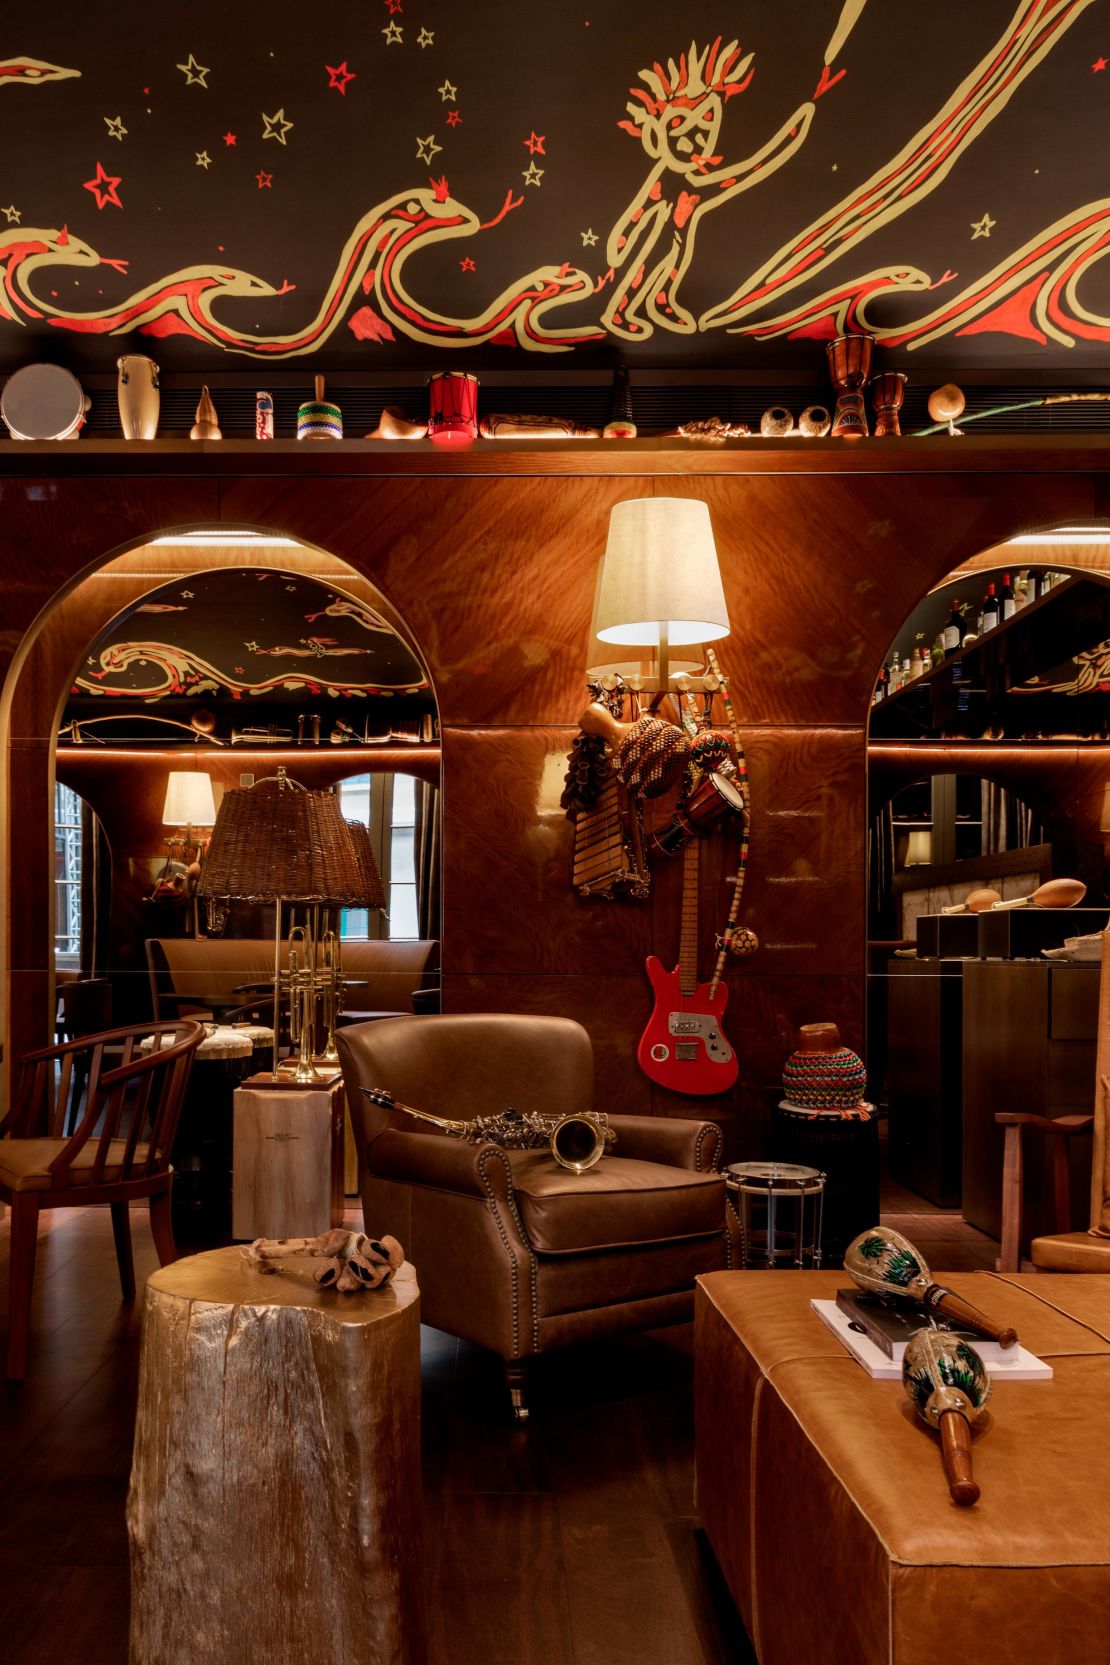 Mounted guitars line the walls of the Rabo di Galo bar at the Rosewood.